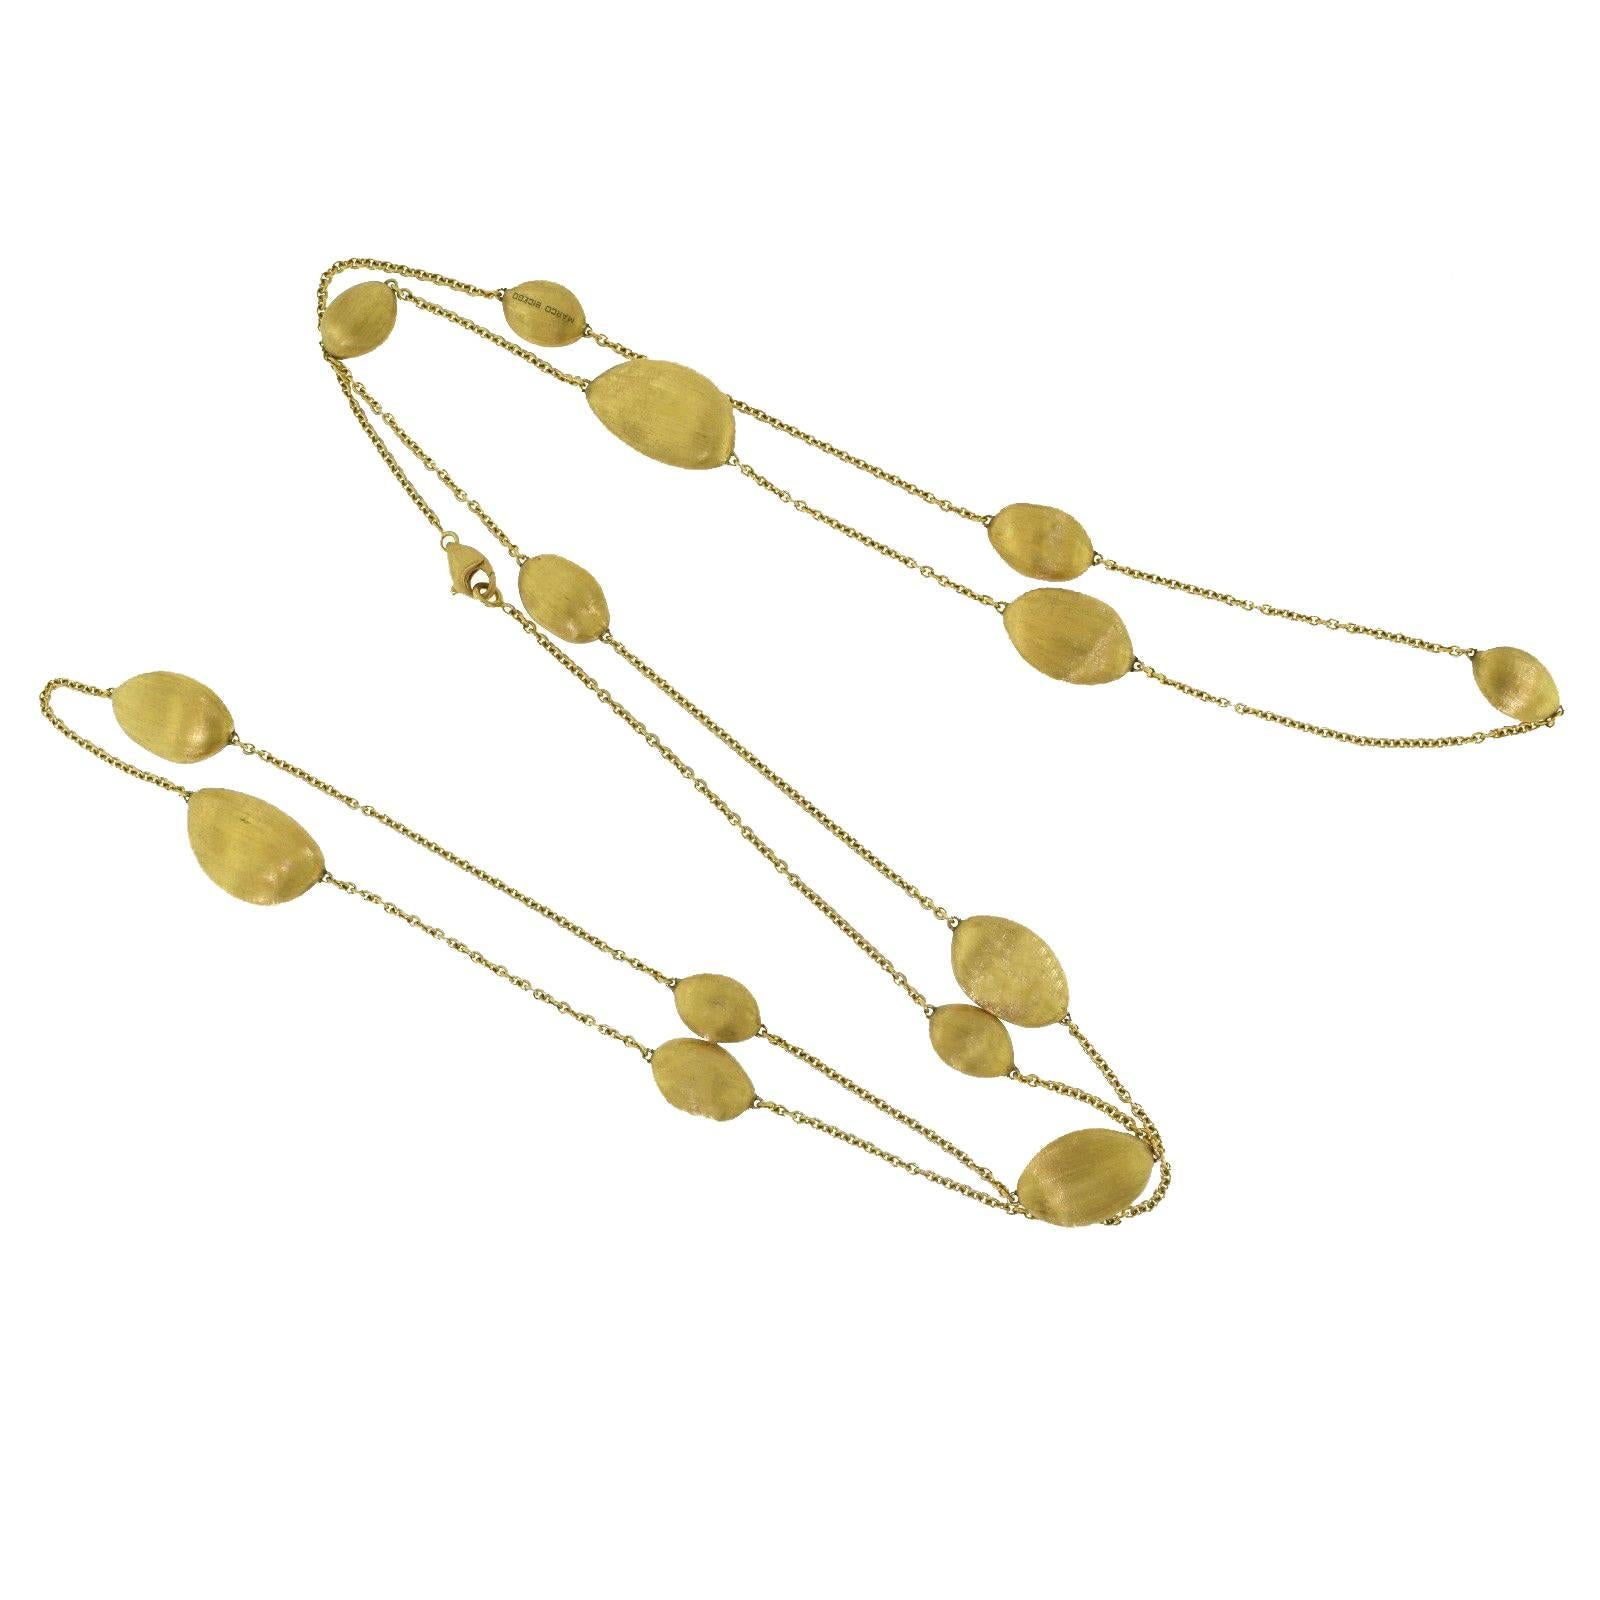 Marco Bicego Confetti Oro Very Long 18 Karat Yellow Gold Necklace For Sale